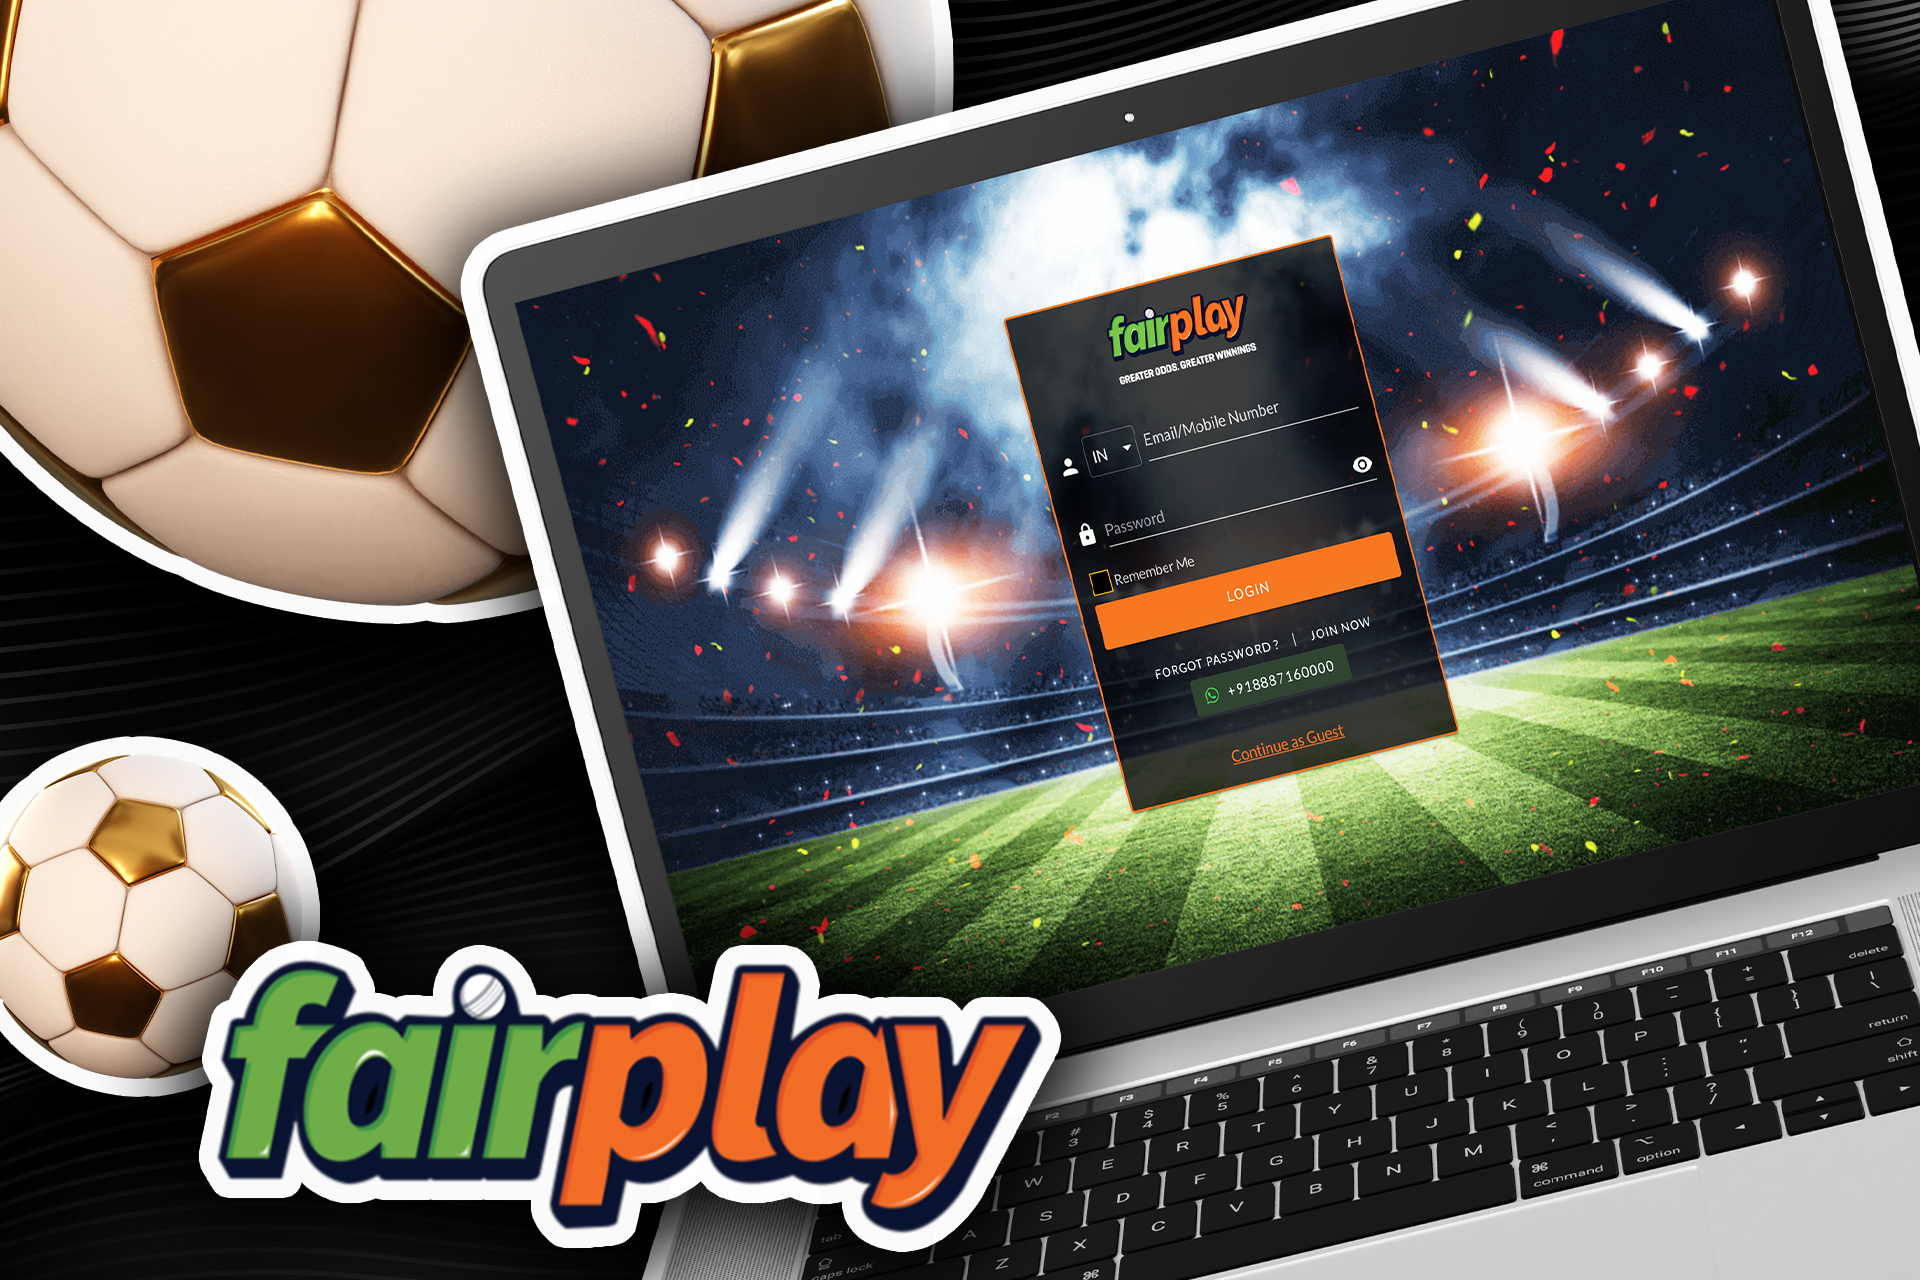 Log in to Fairplay to get access to your account.